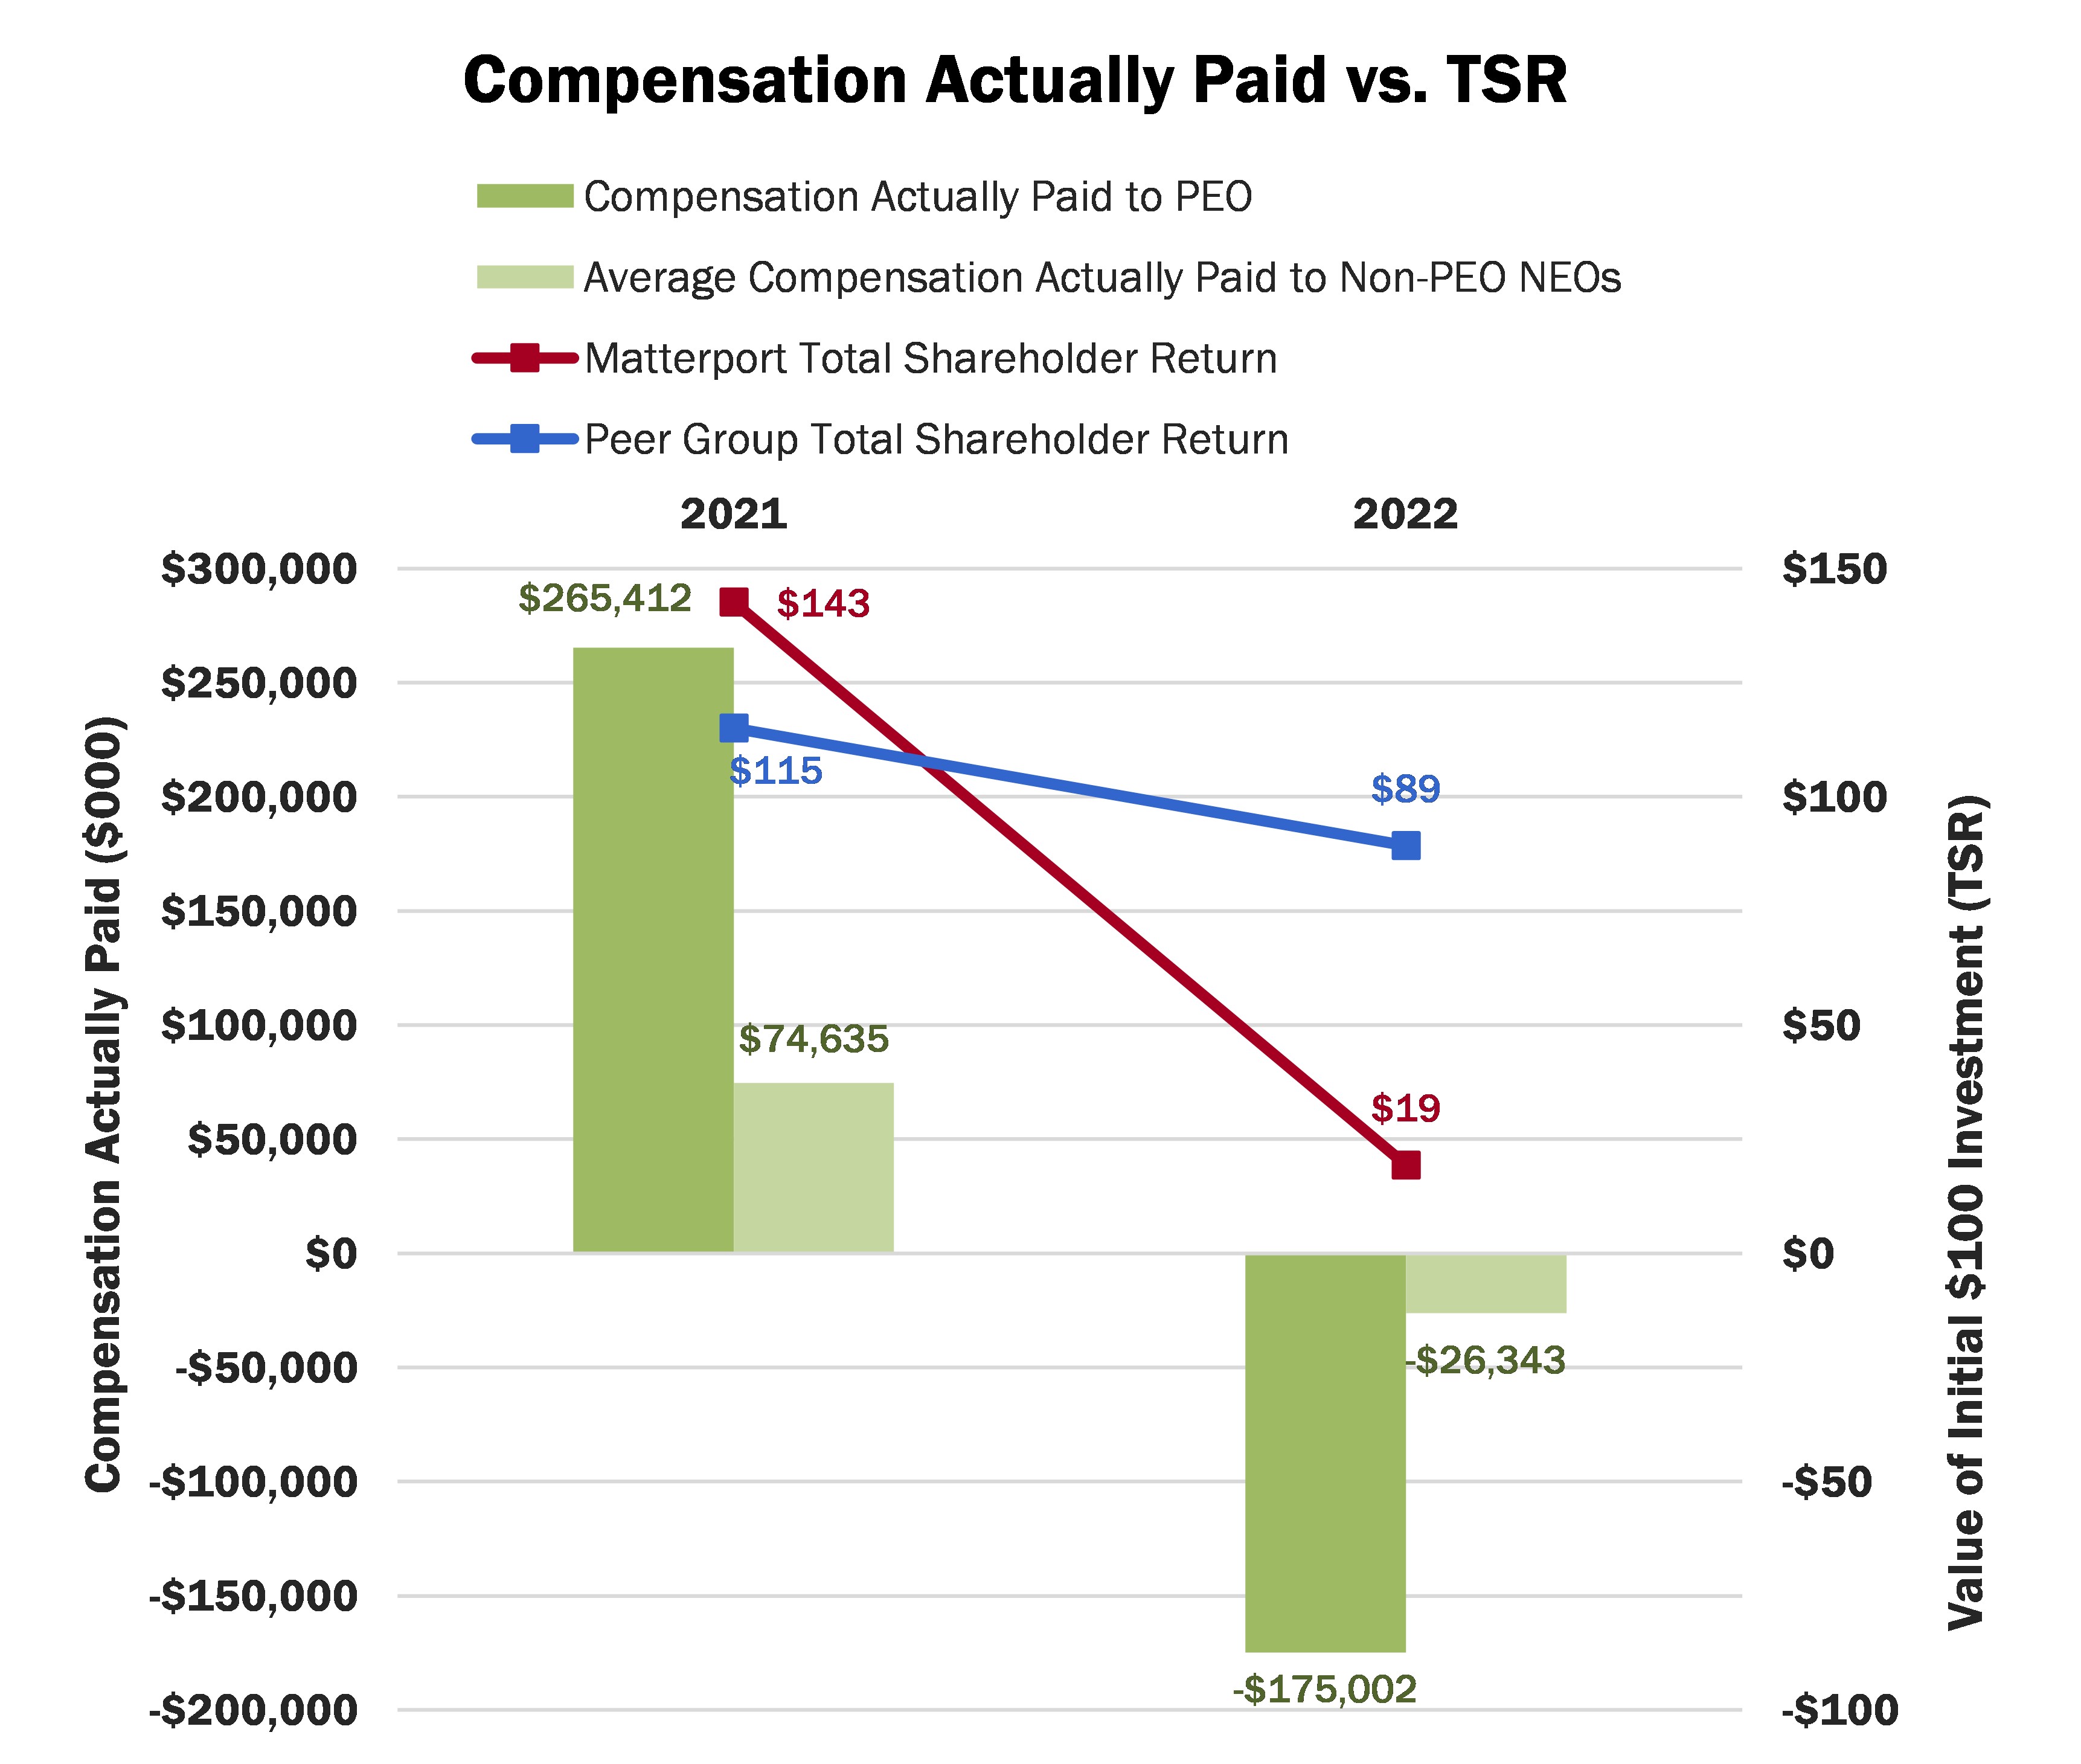 Compensation Actually Paid vs. TSR.jpg